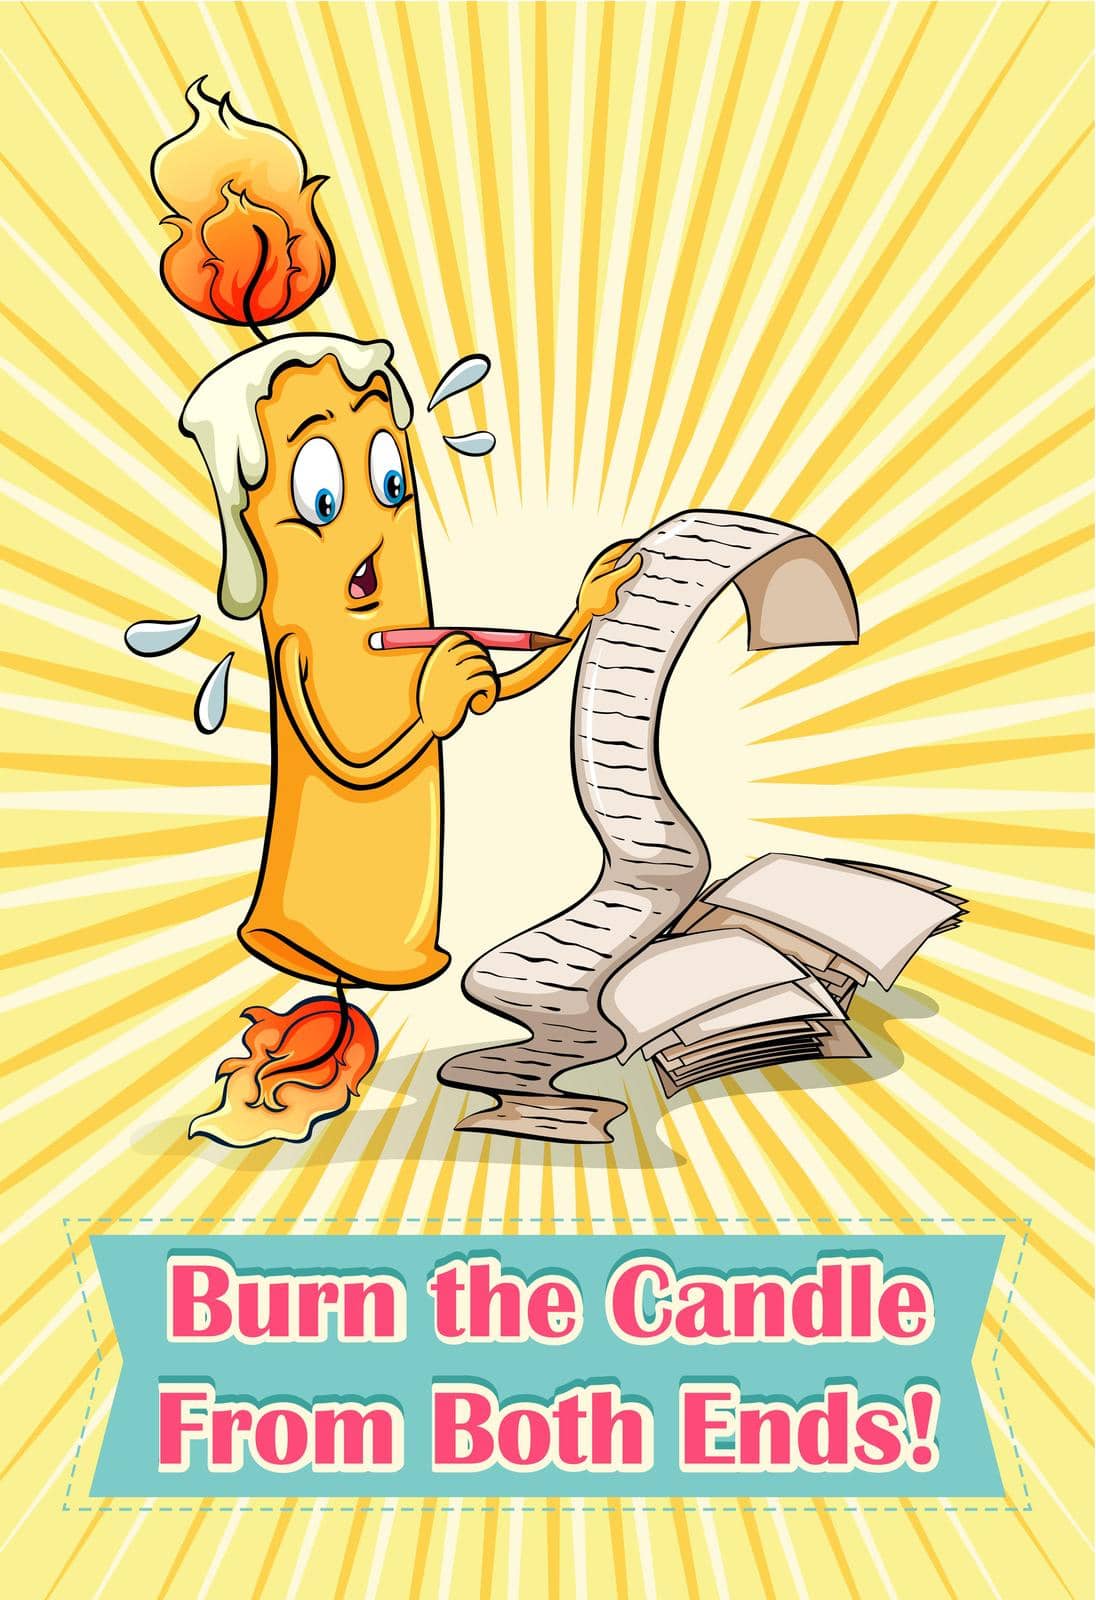 Burn the candle from both ends illustration